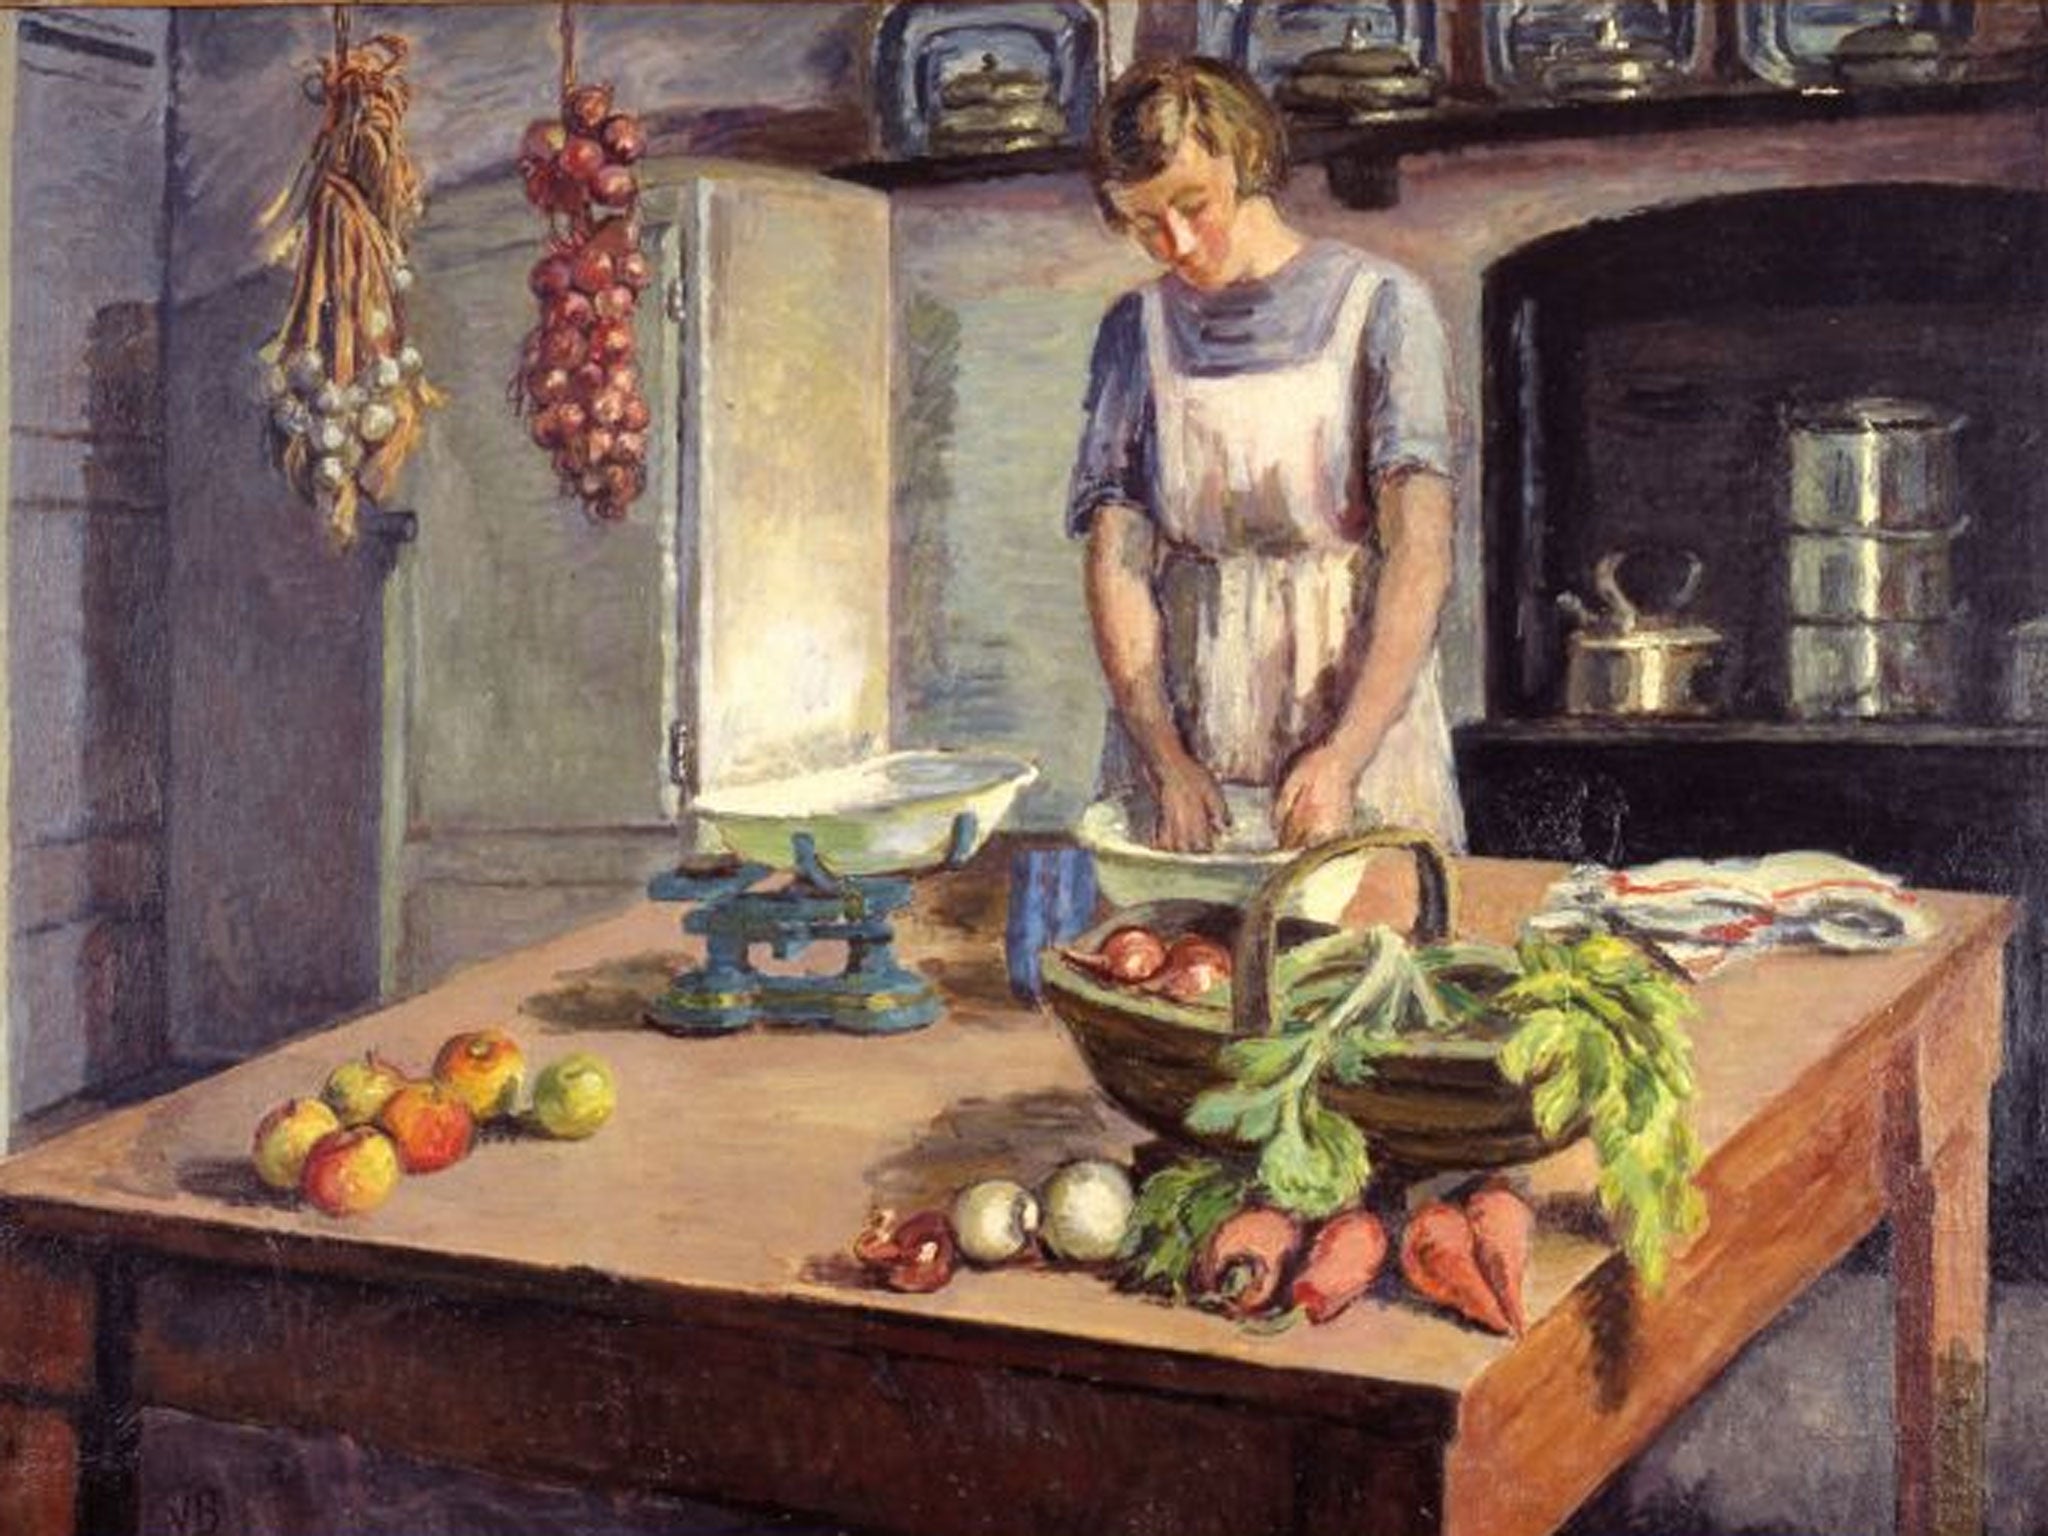 'The Kitchen' by Vanessa Bell